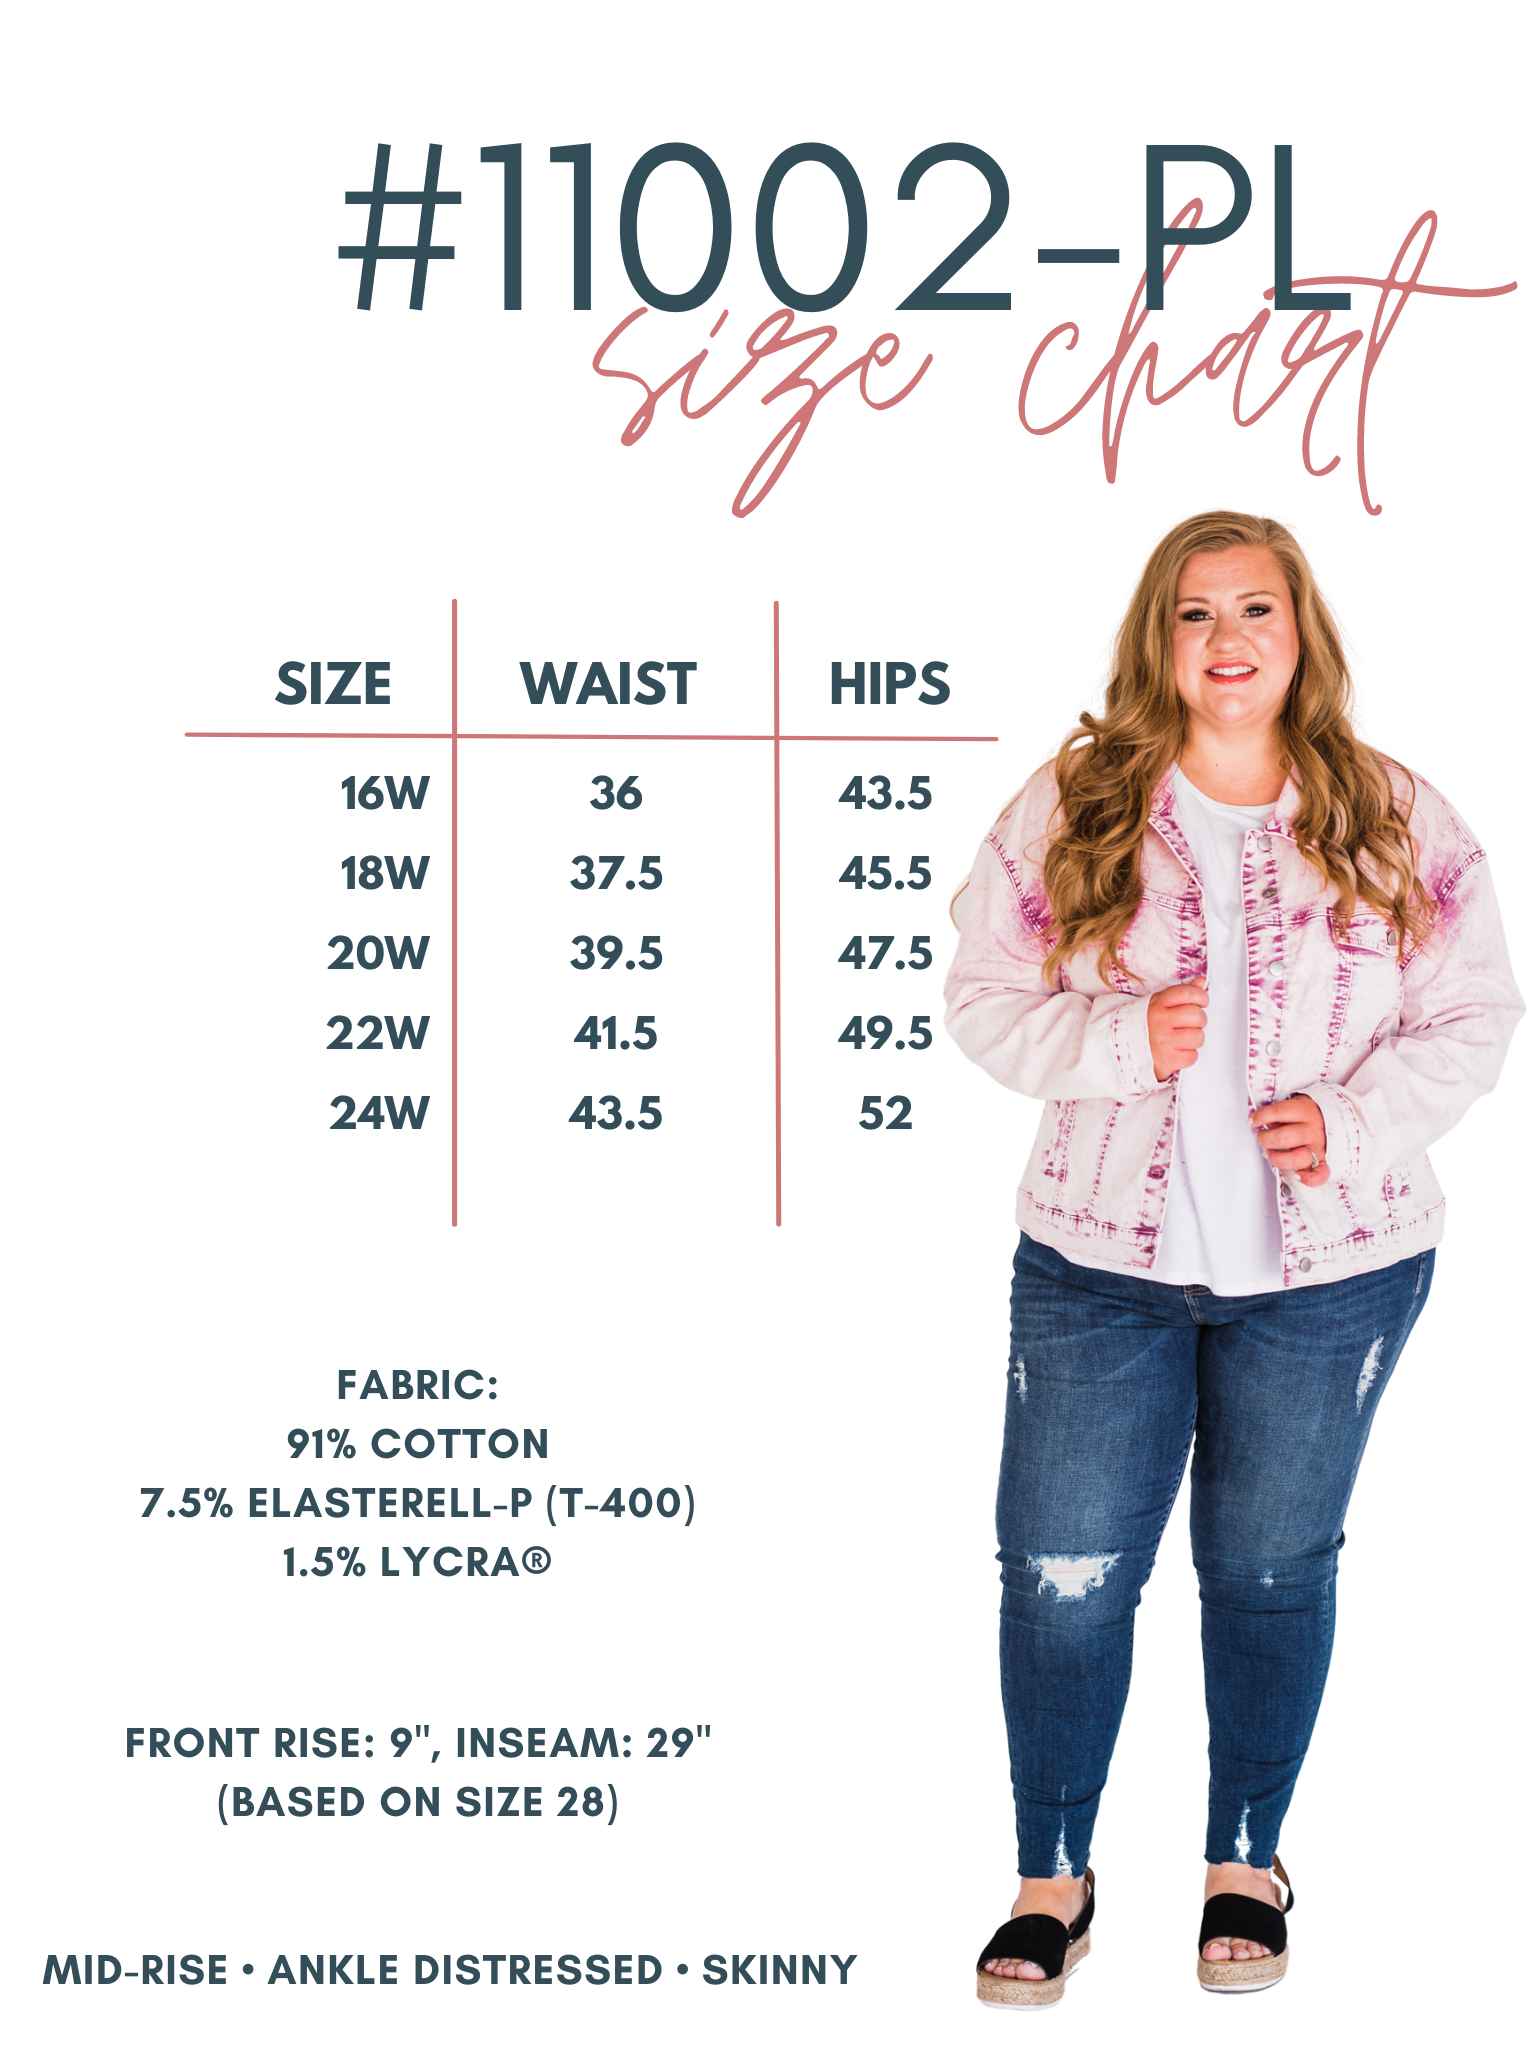 Size Chart for Curvy Distressed Denim Jeggings